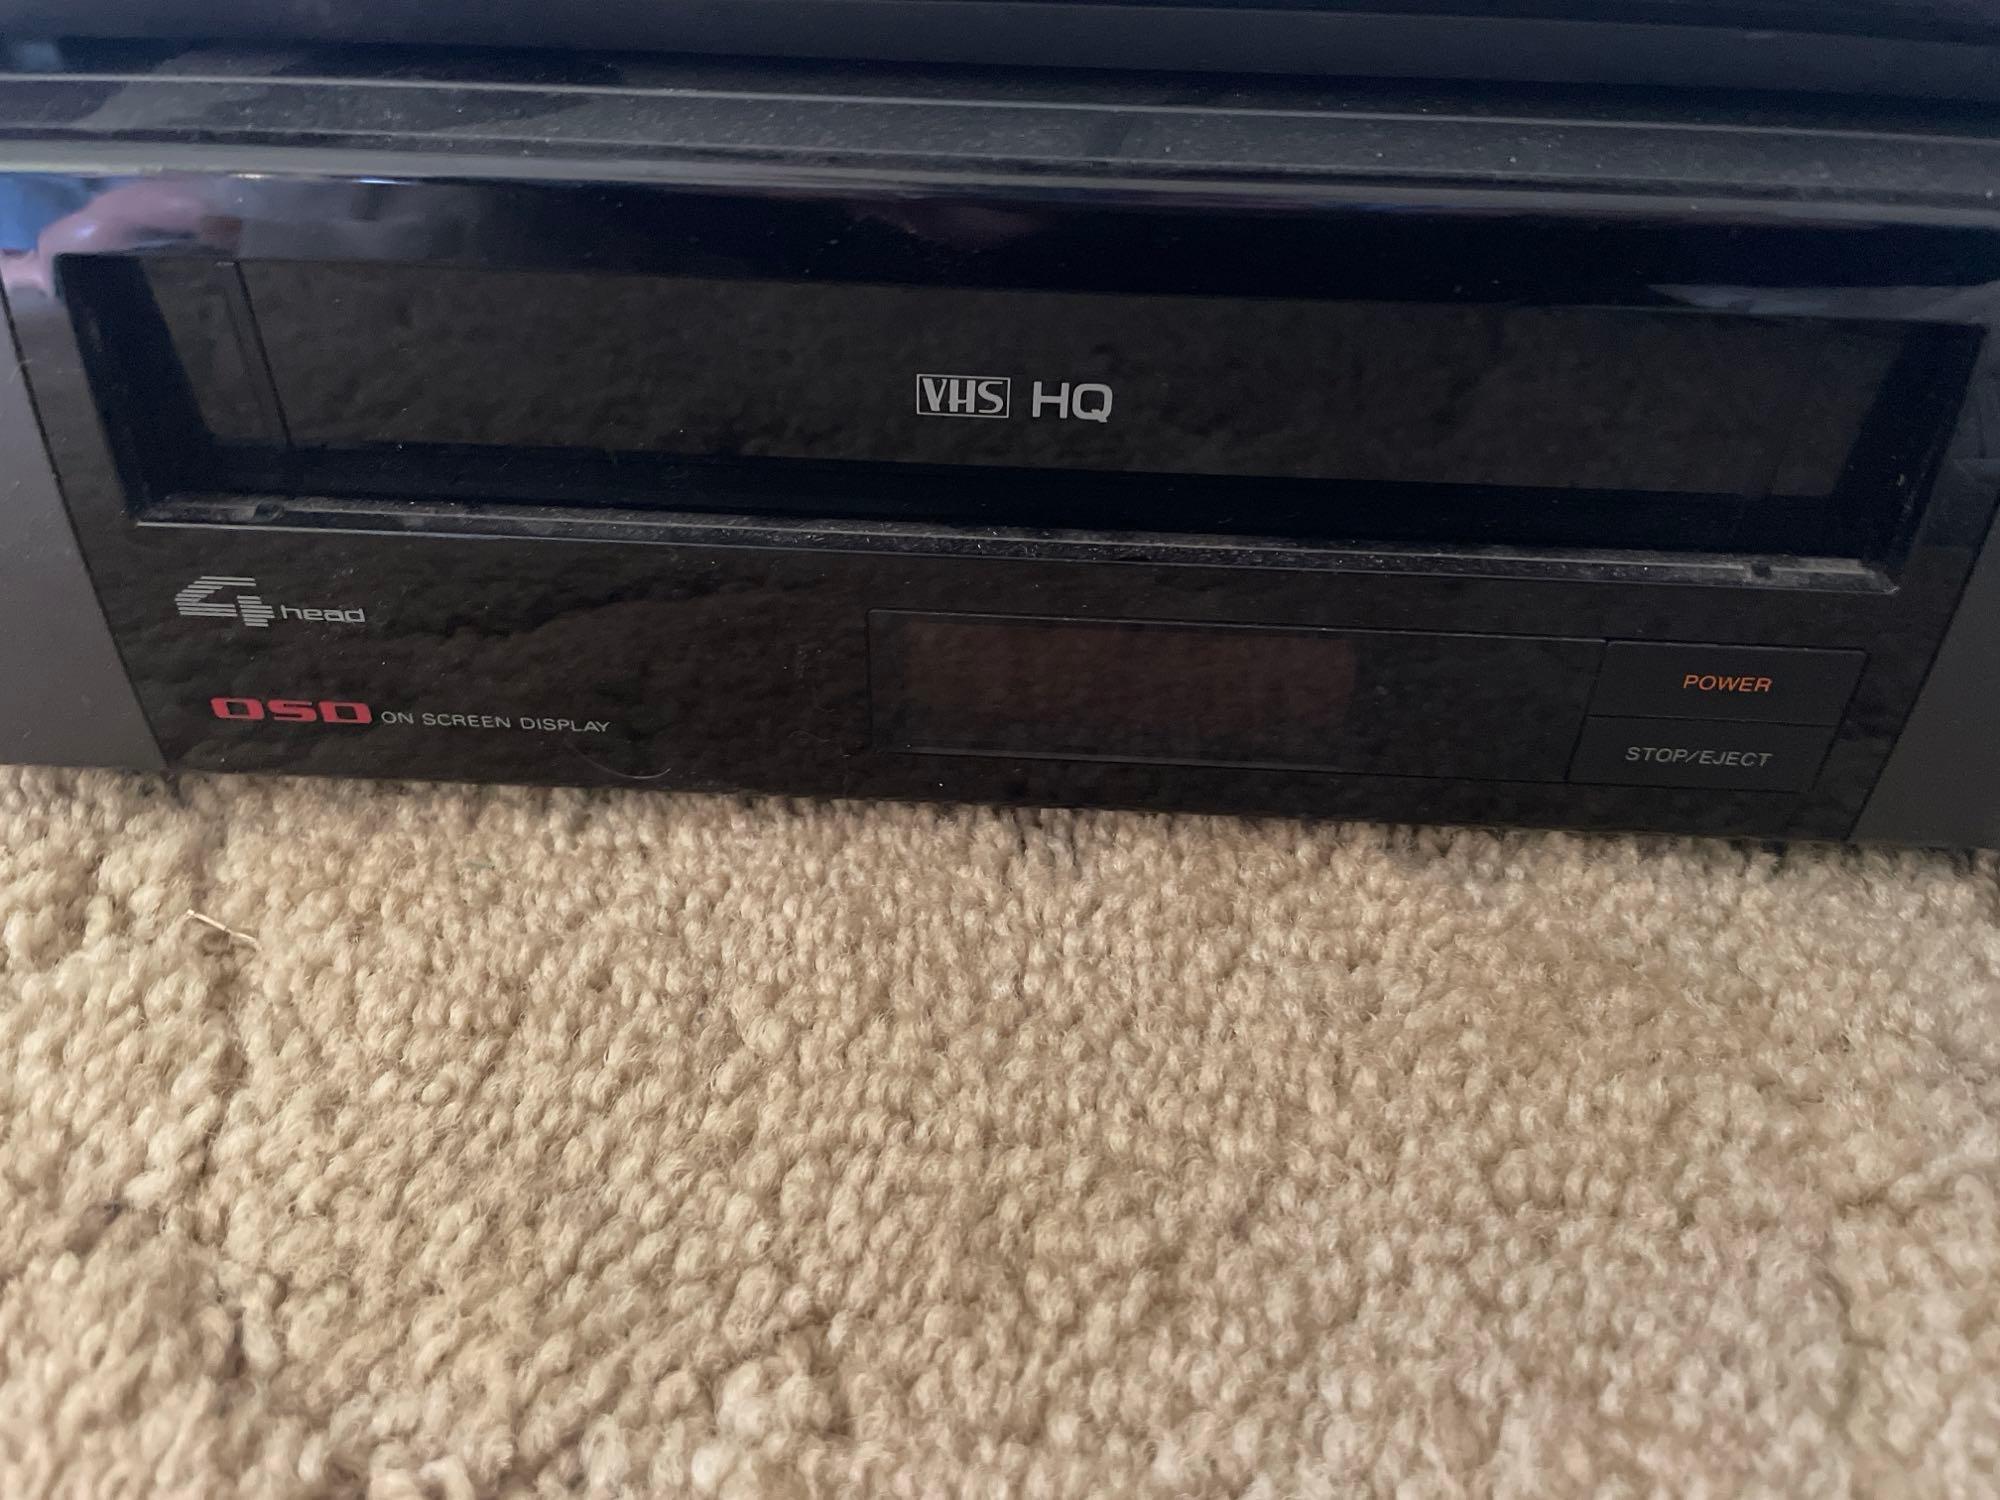 VCR player; VHS player